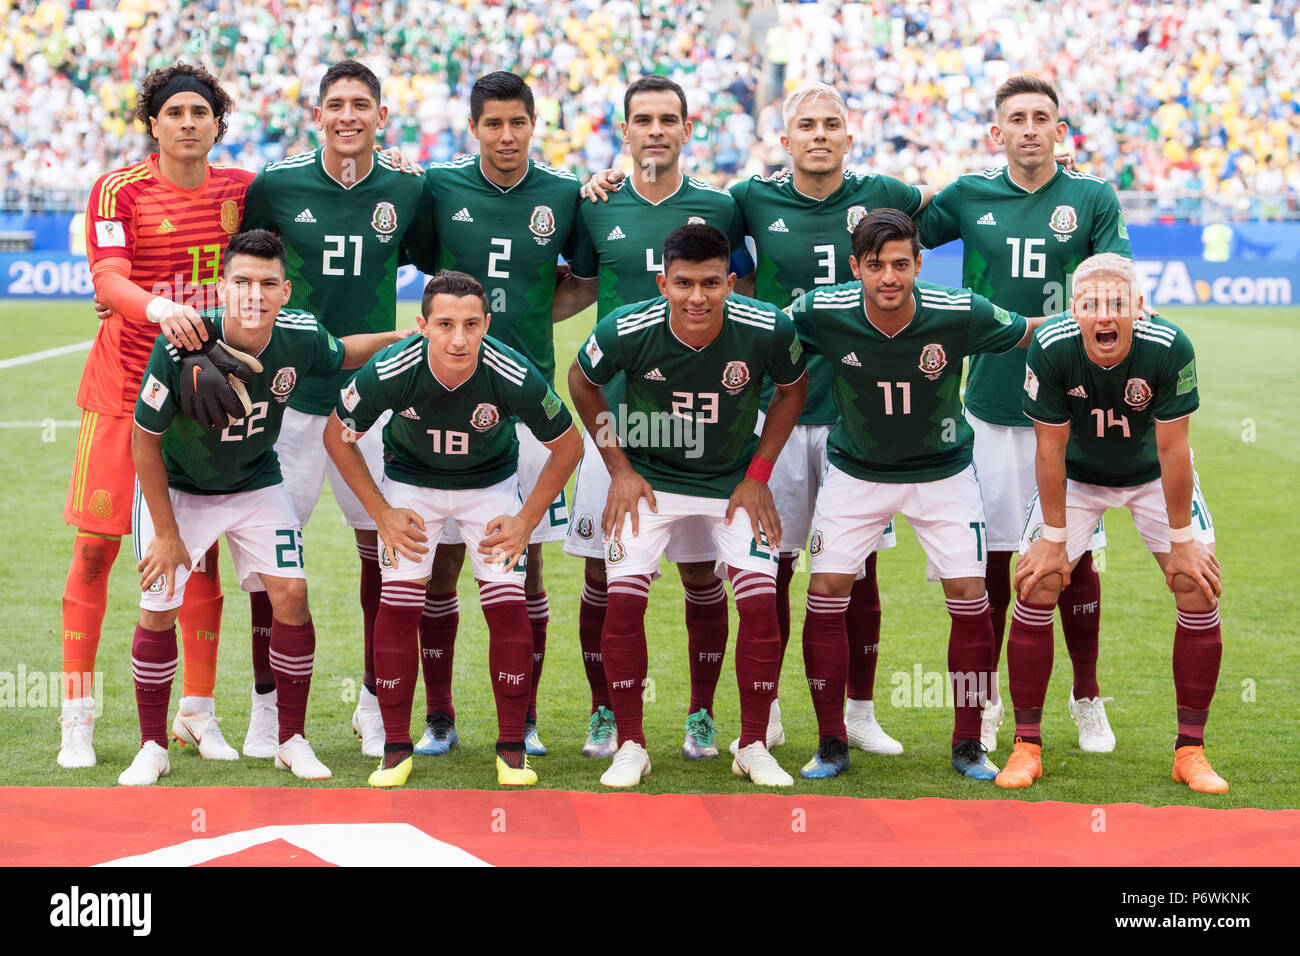 ORleft to right goalkeeper Guillermo OCHOA (MEX), Edson ALVAREZ (MEX), Hugo AYALA (MEX), Rafael MARQUEZ (MEX), Carlos SALCEDO (MEX), Hector HERRERA (MEX), uRleft to right Hirving LOZANO (MEX), Andres GUARDADO (MEX), Jesus GALLARDO (MEX), Carlos VELA (MEX), Javier HERNANDEZ (MEX), Team Photo, Group Picture, Team Photo, Team Picture, Full Figure, Landscape, Brazil (BRA) - Mexico (RUS) 2: 0, Round of 16, Game 53, on 02.07.2018 in Samara; Football World Cup 2018 in Russia from 14.06. - 15.07.2018. | usage worldwide Stock Photo